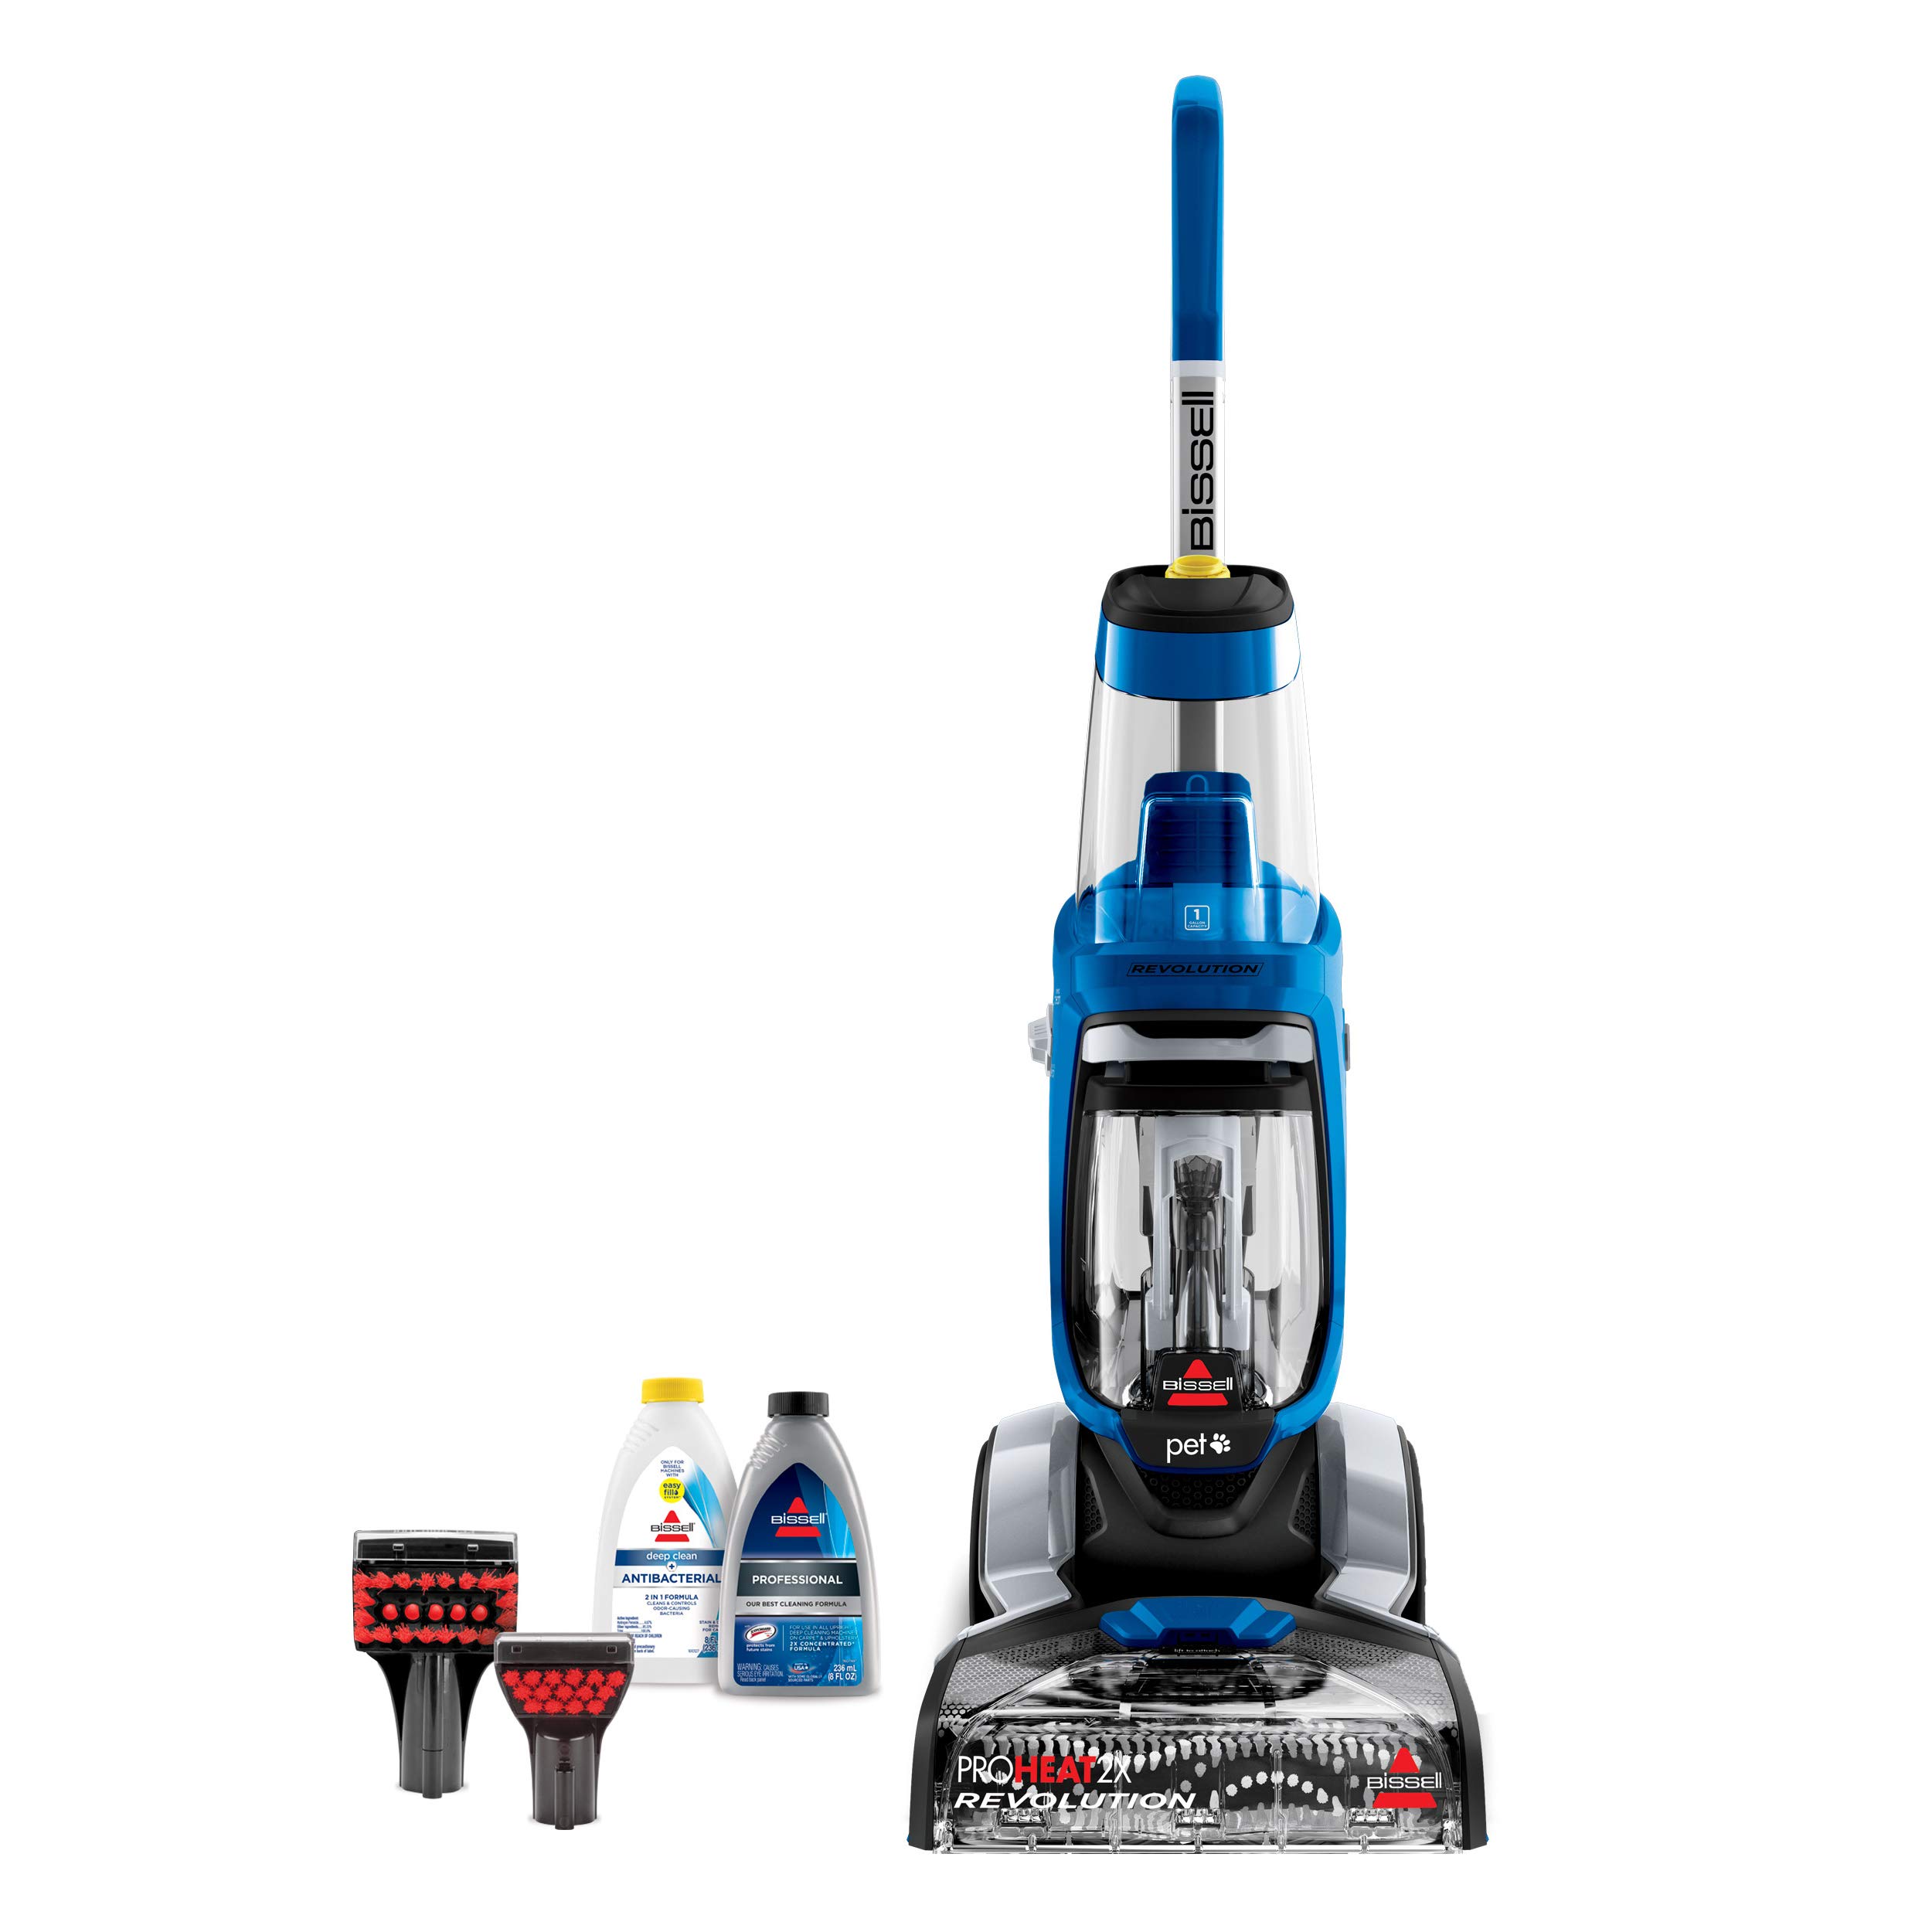 BISSELL ProHeat 2X Revolution Pet Full Size Upright Carpet Cleaner, 15489, Blue eBay